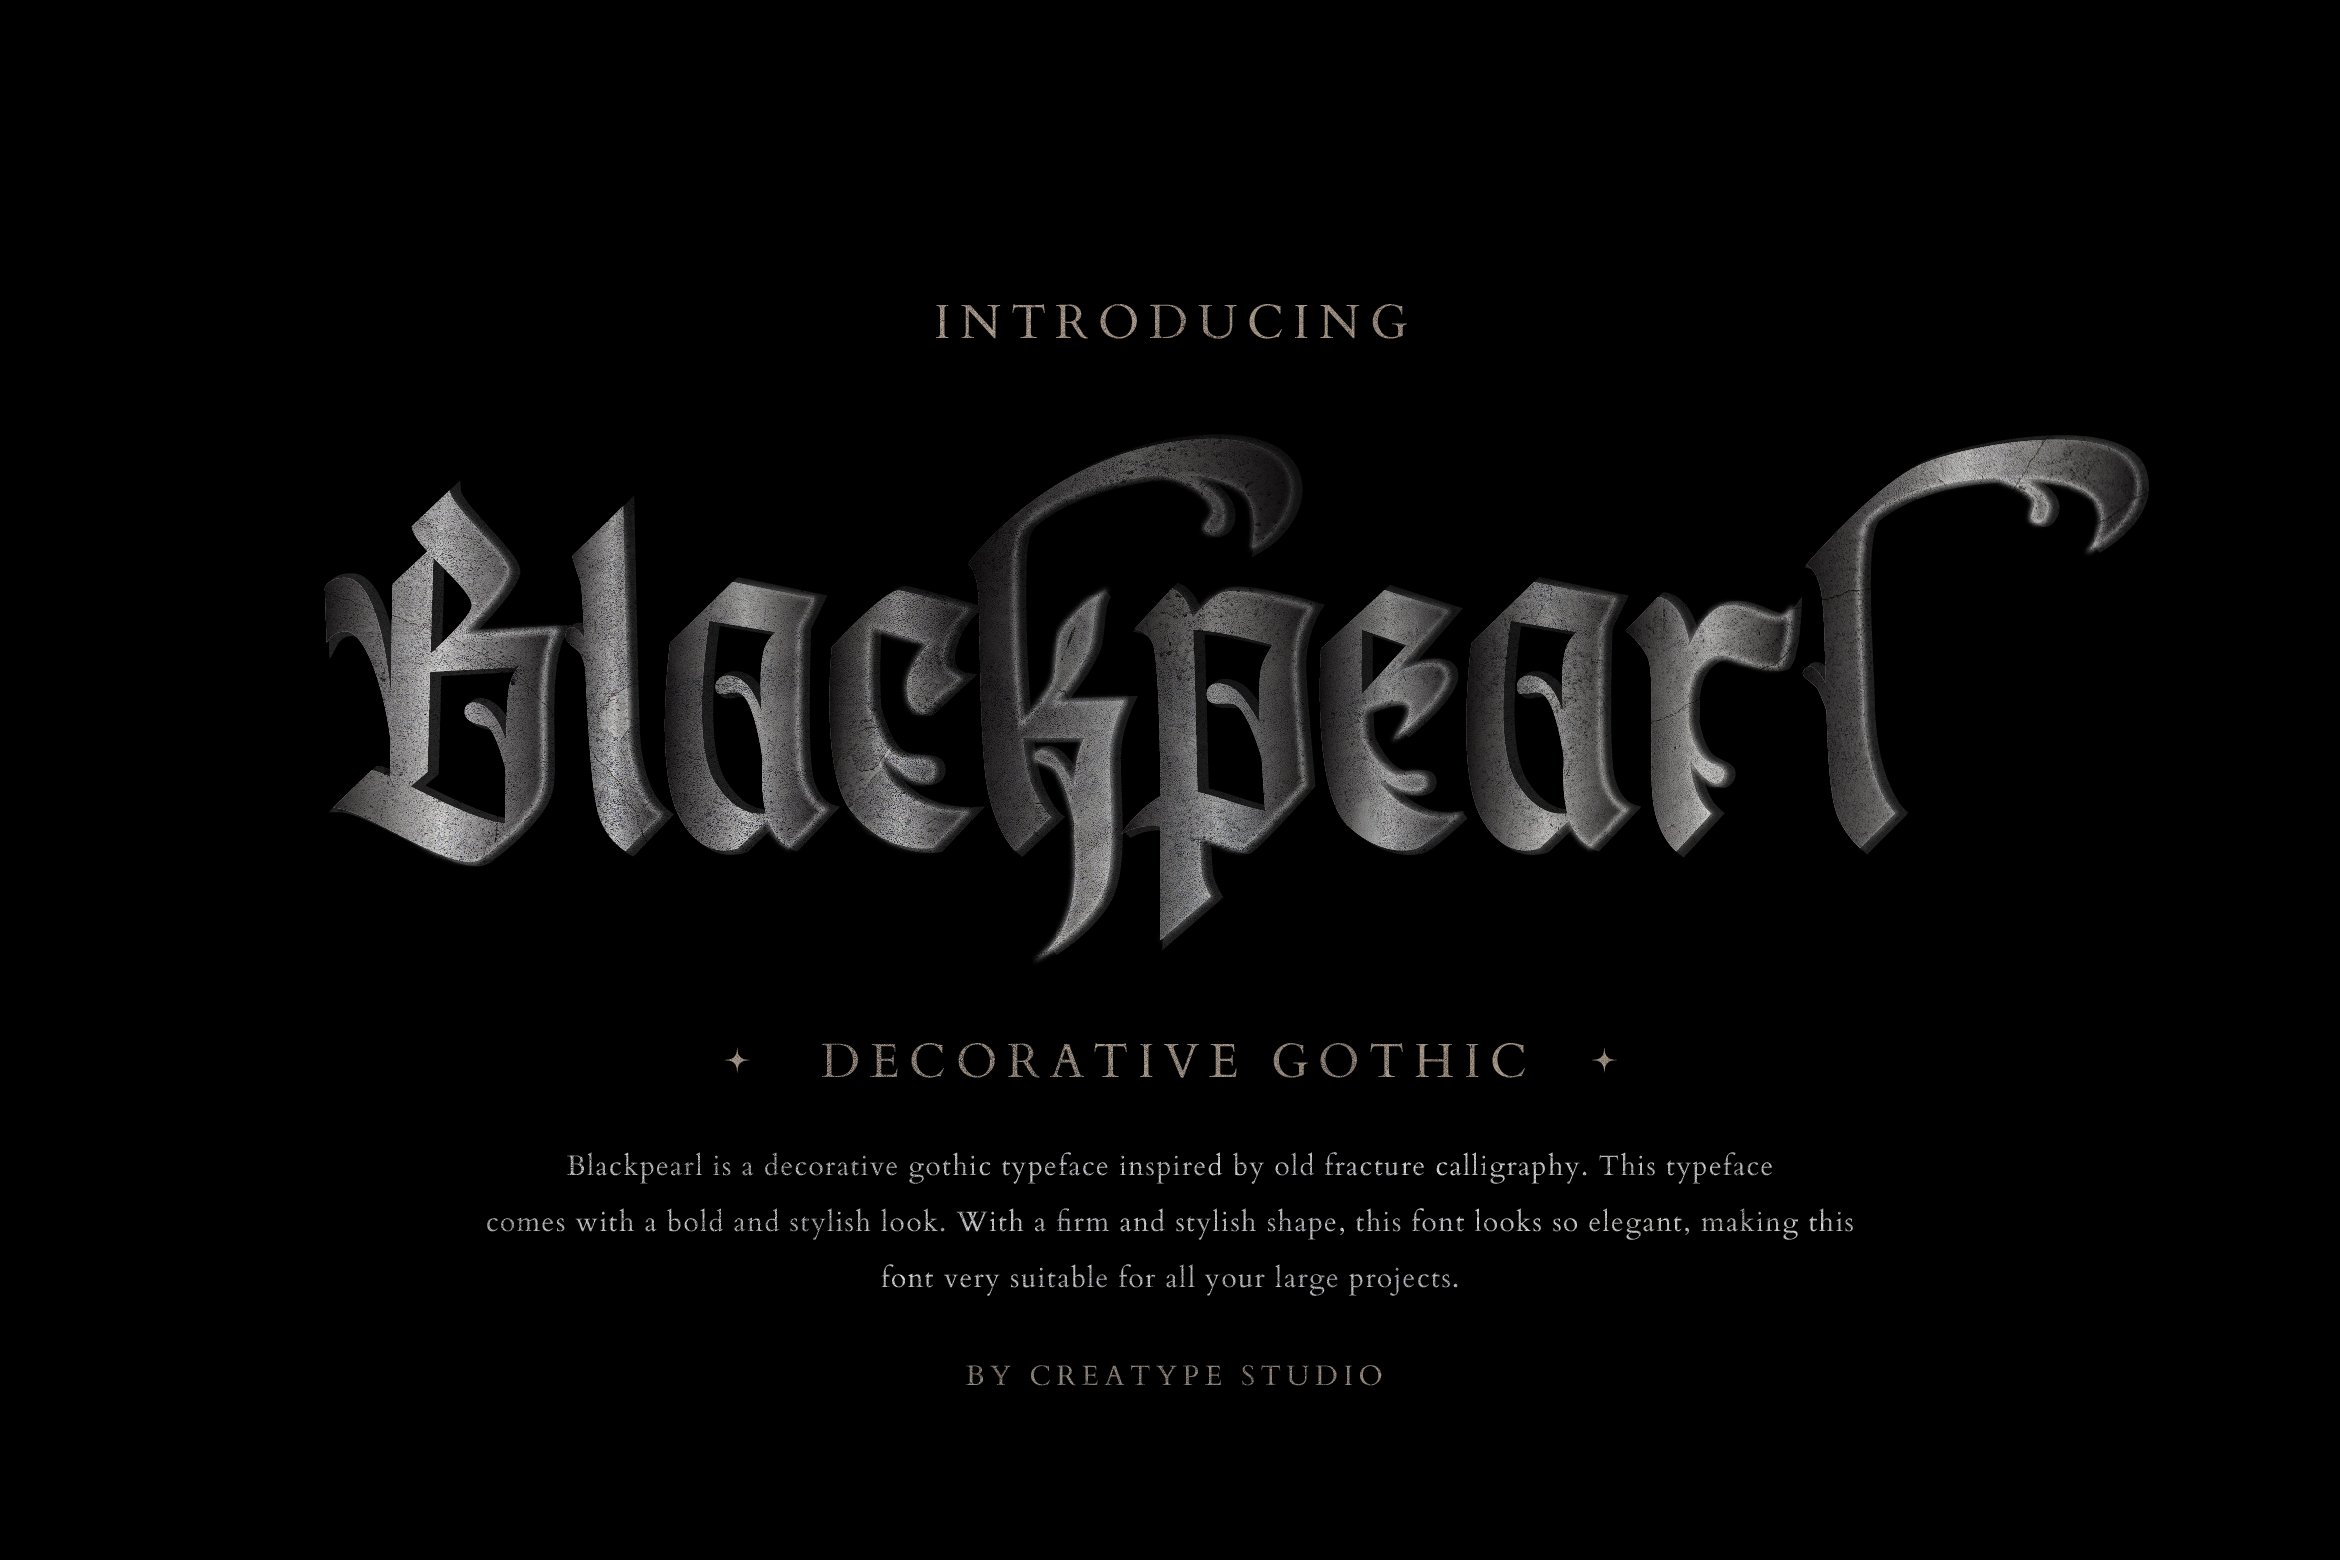 Blackpearl Gothic Business Font cover image.